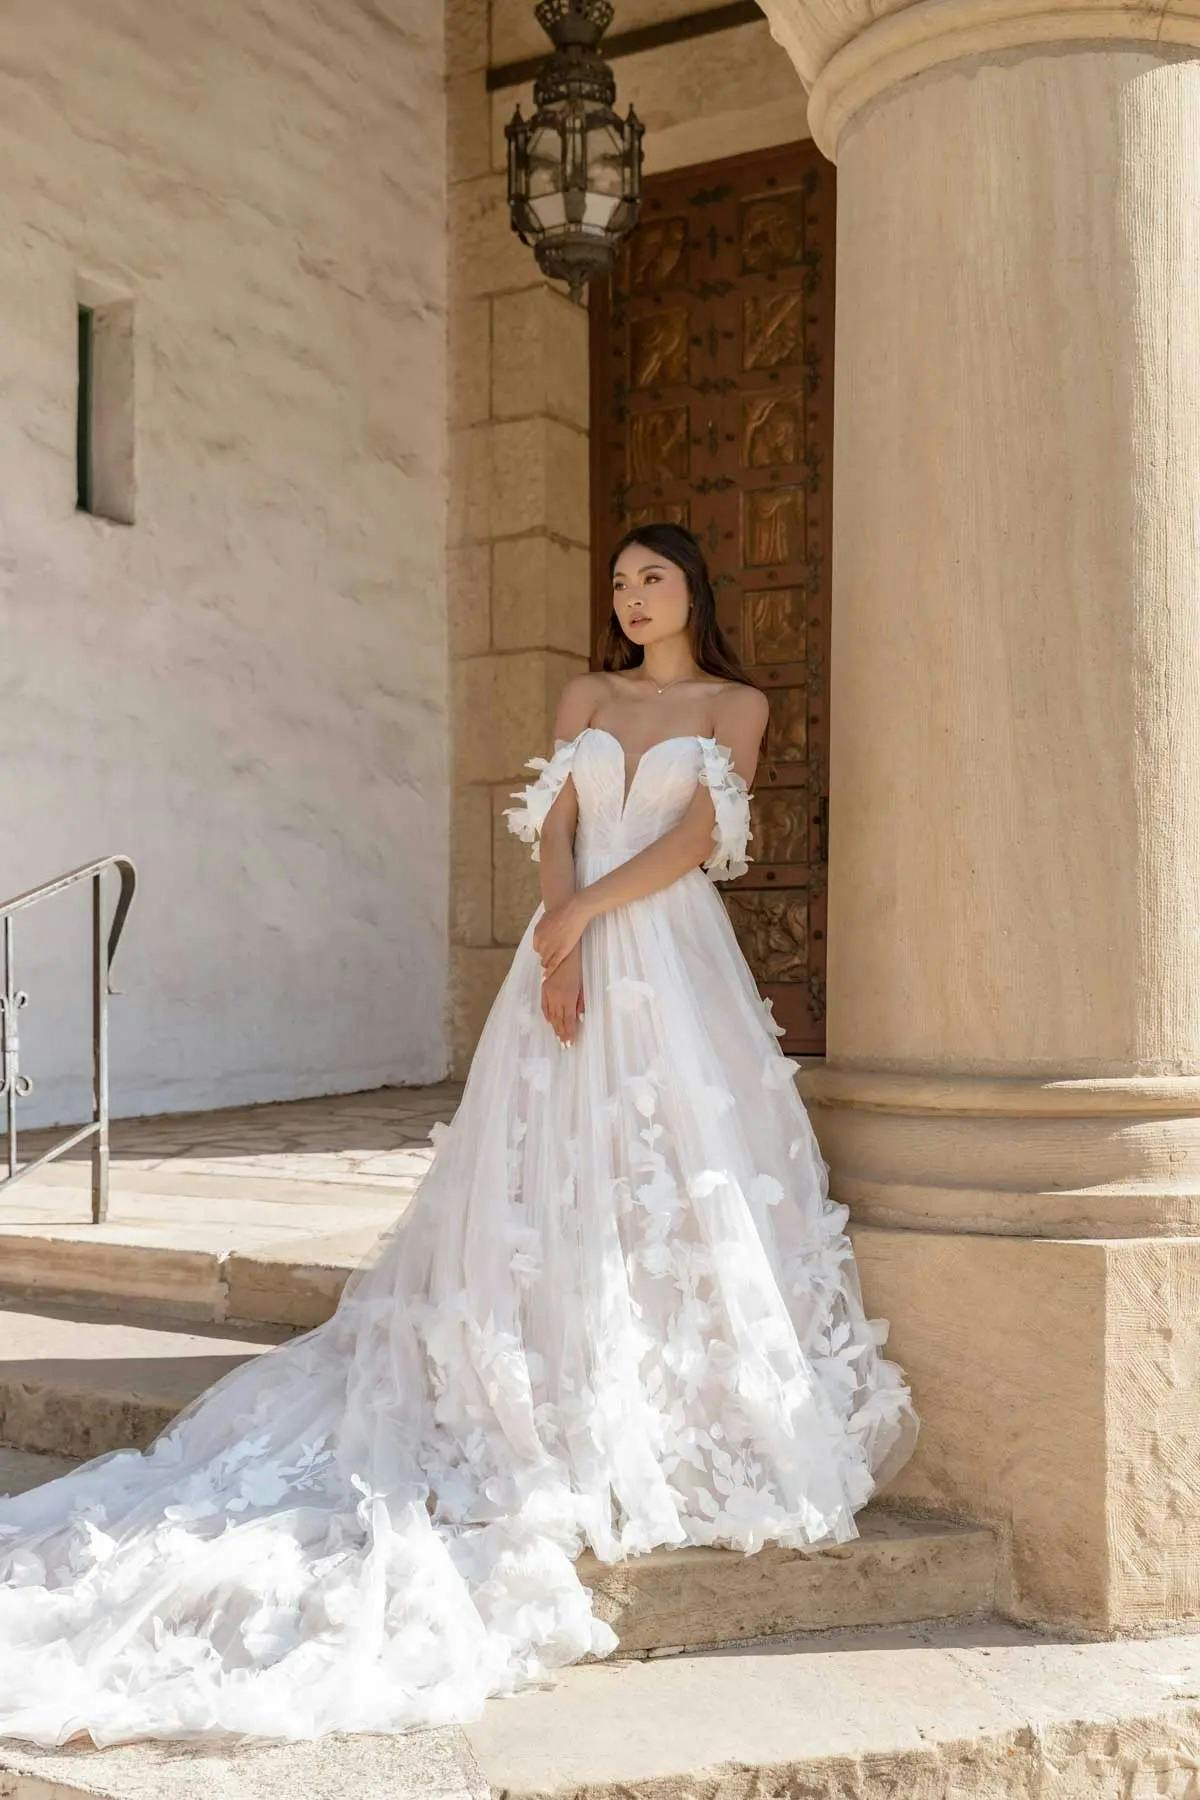 Picture of Essense dress on bride outside on stone steps